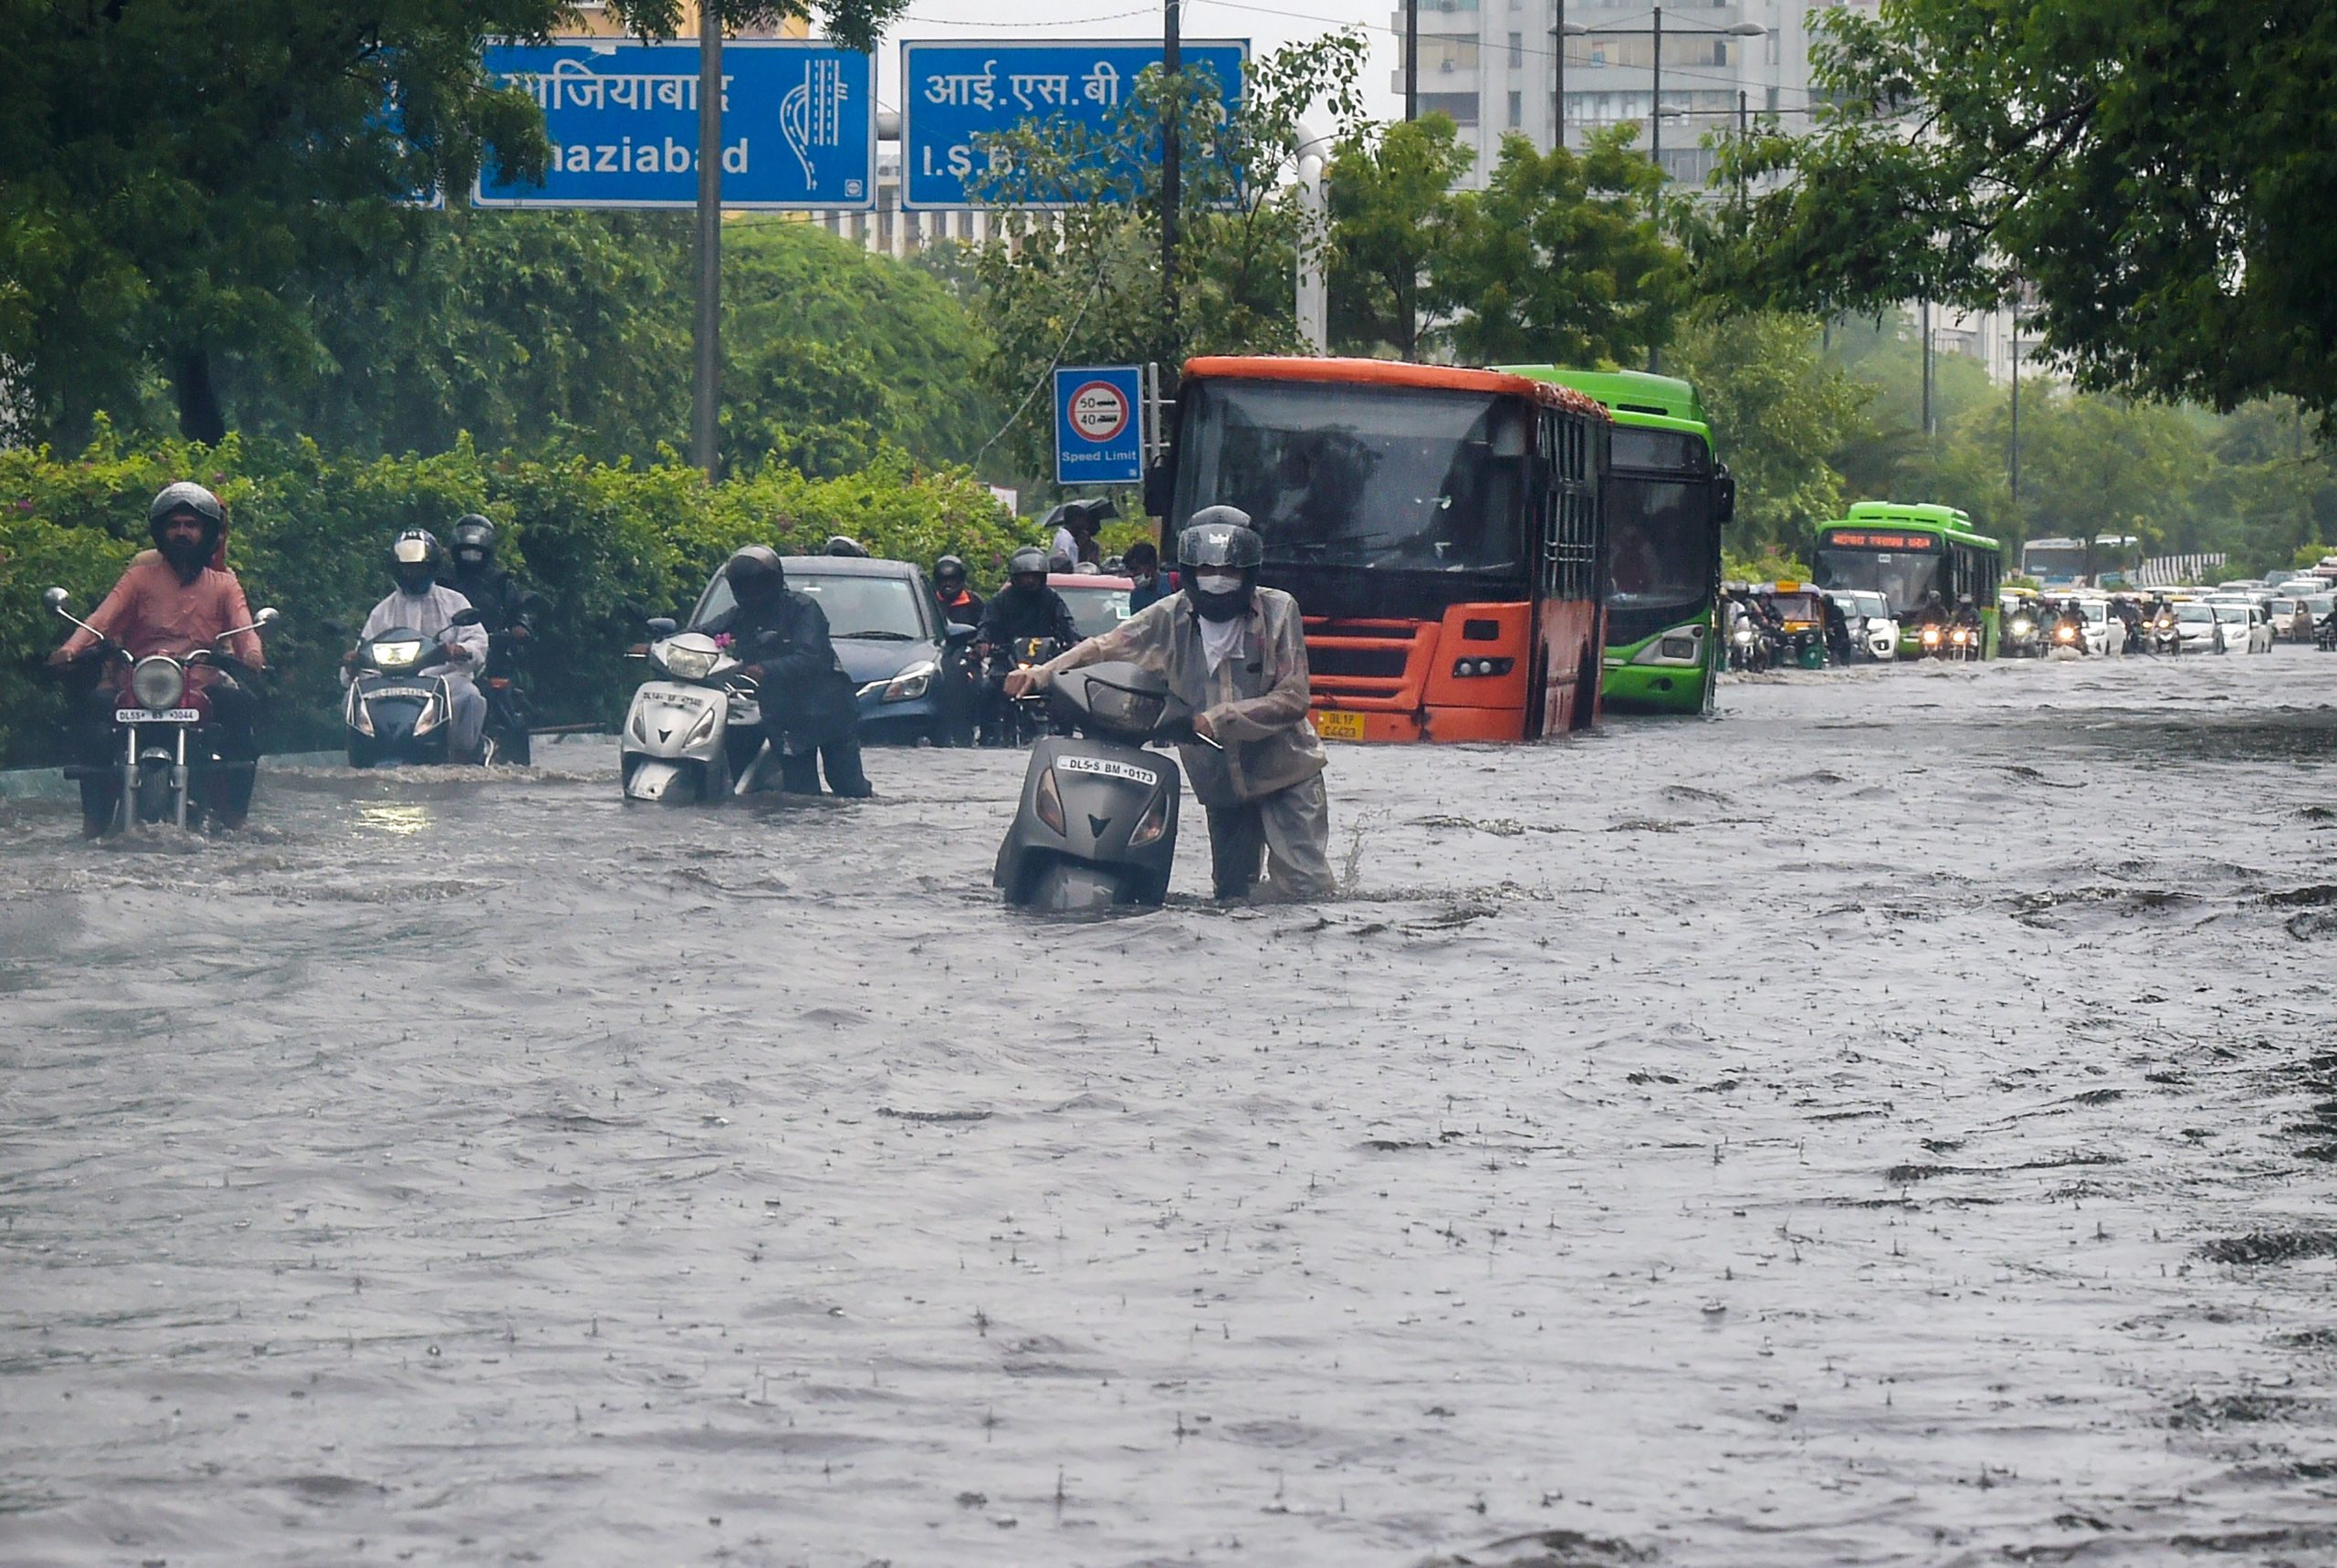 27-year-old drowns while filming waterlogged underpass in Delhi